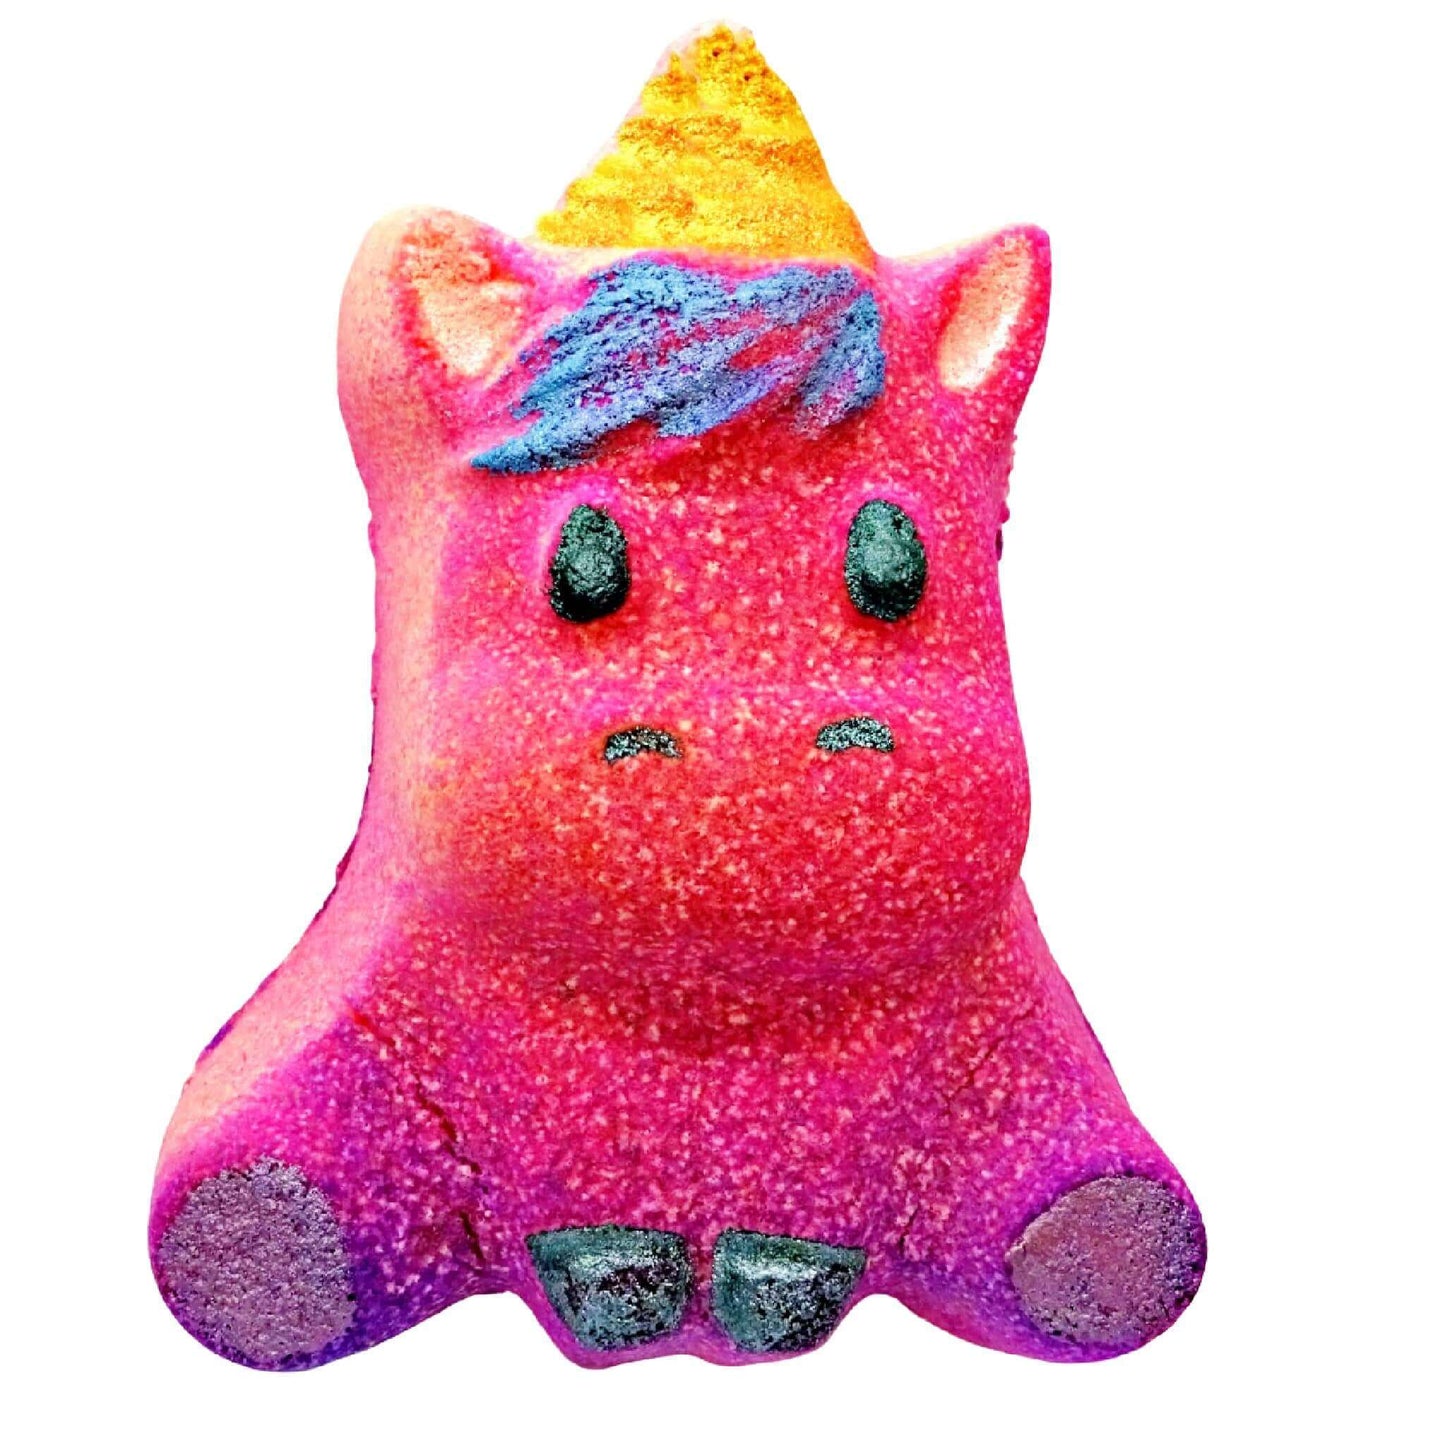 Unicorn lovers rejoice! Experience a magical burst of flavor with our Raspberry Lemonade Fizzy Unicorn Bomb.